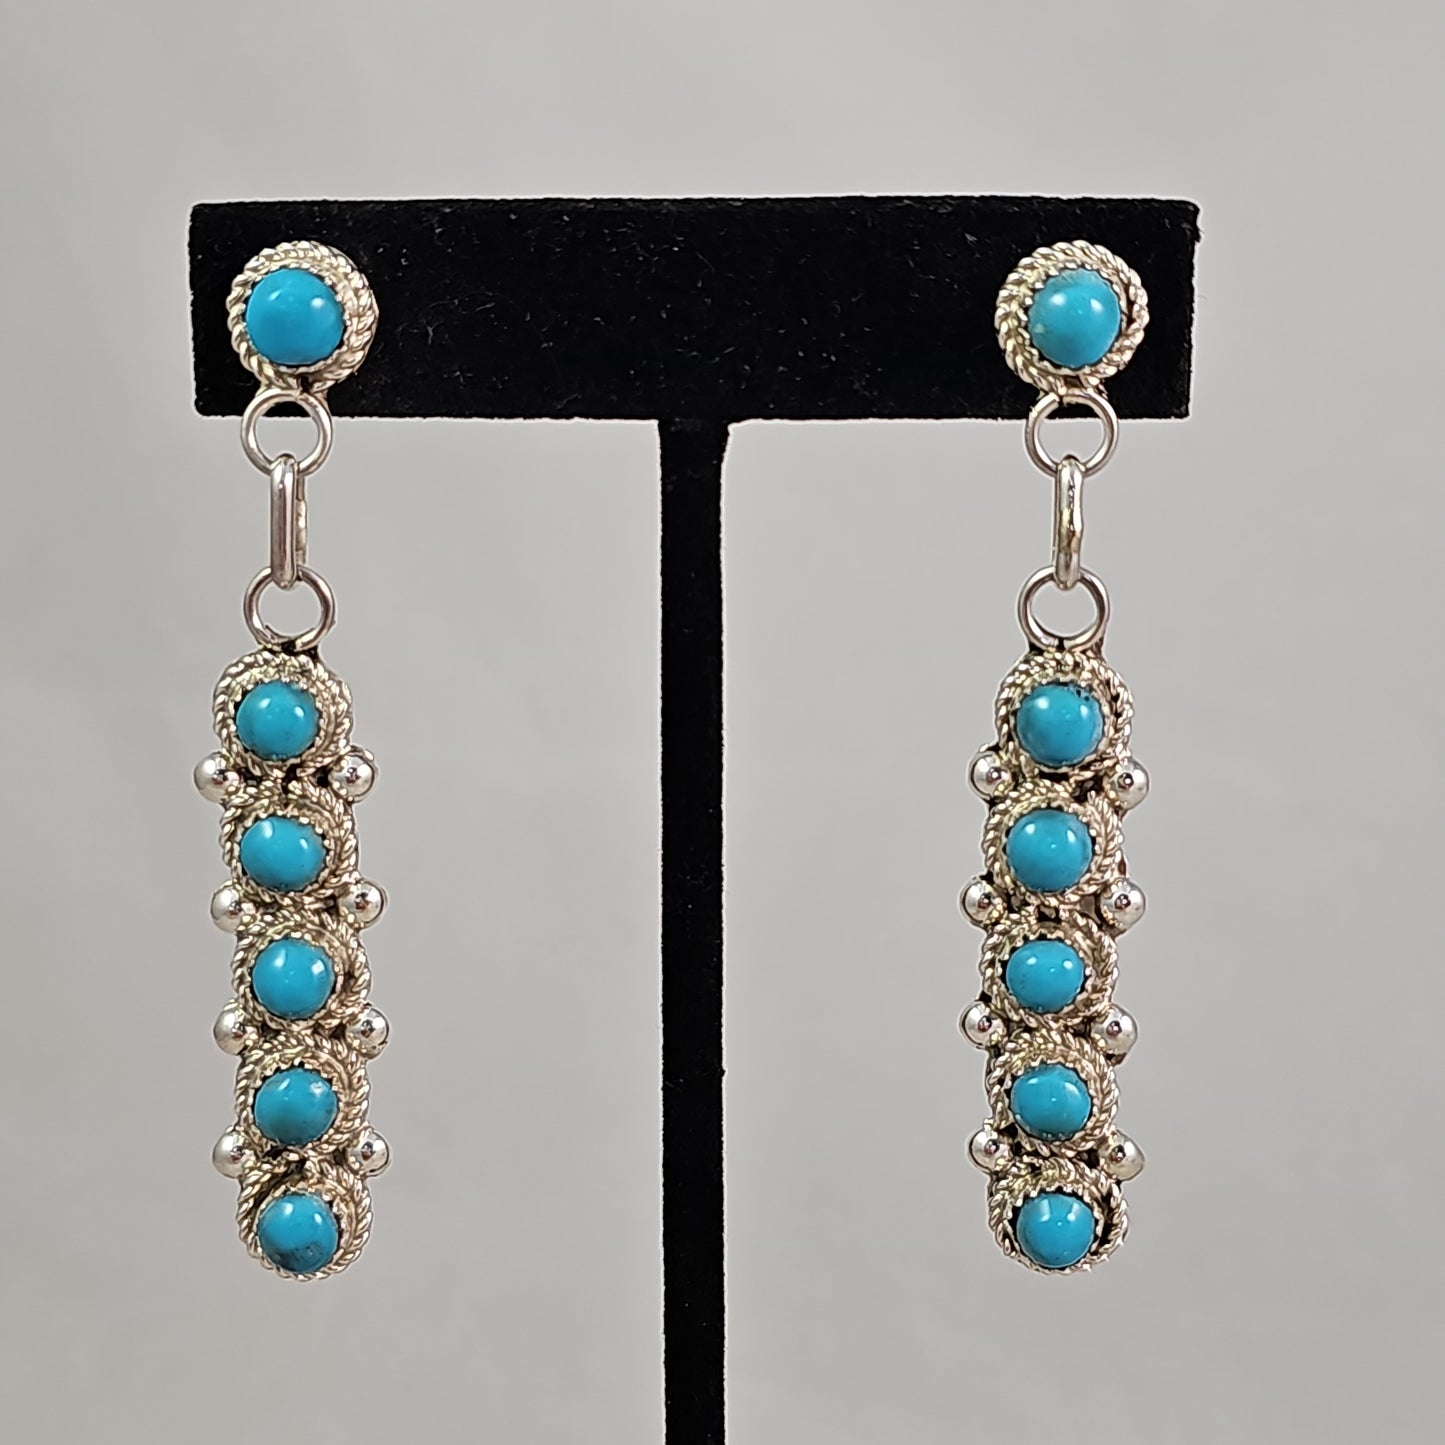 Turquoise & sterling 6 stone earrings